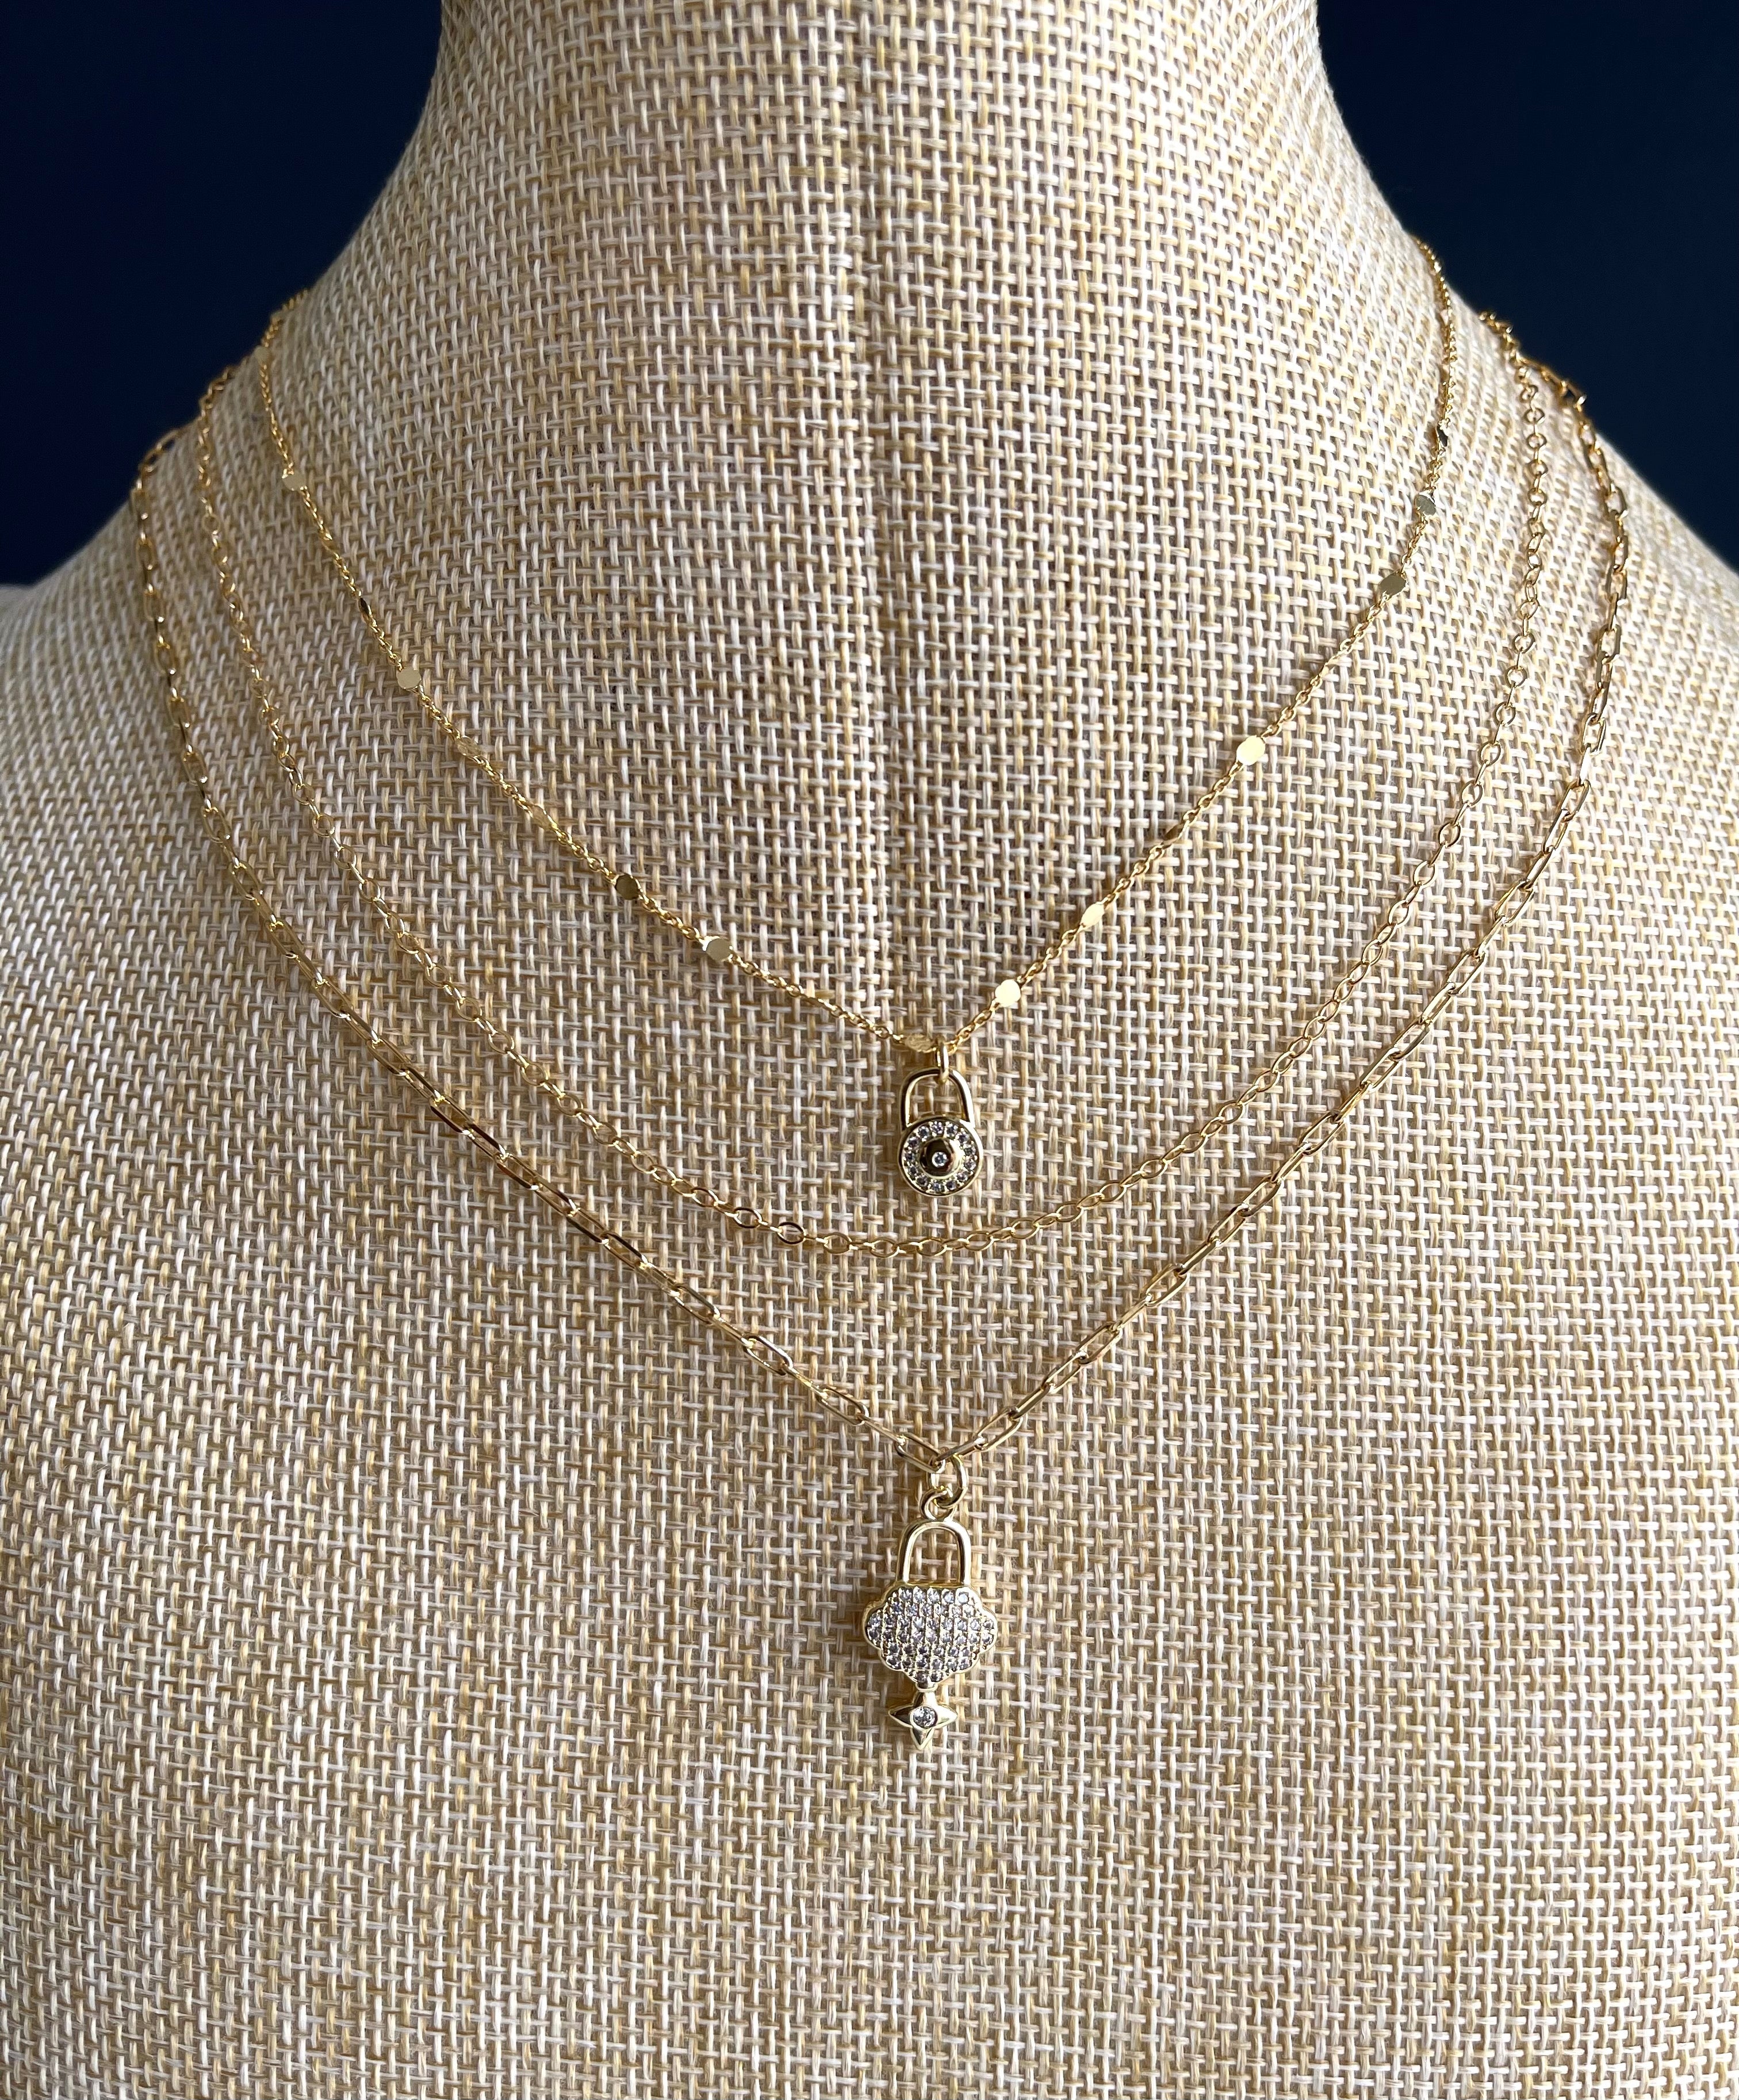 Triple Gold Filled Necklace with Charms